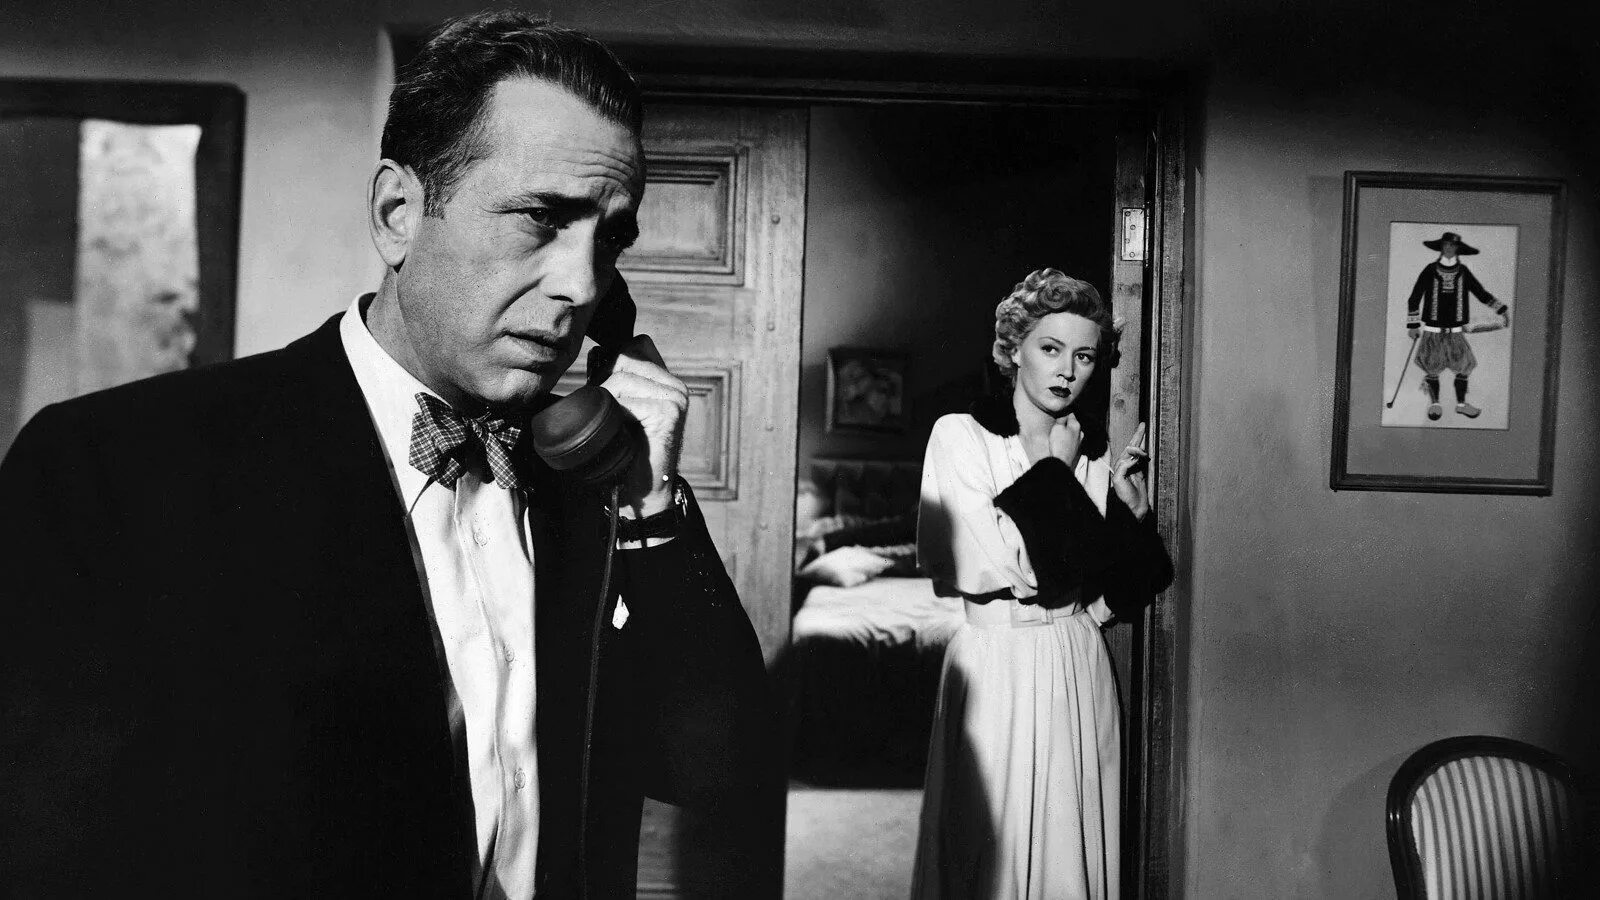 Хамфри Богарт. В Укромном месте in a Lonely place, 1950. Нуар Хичкок. It s just a little